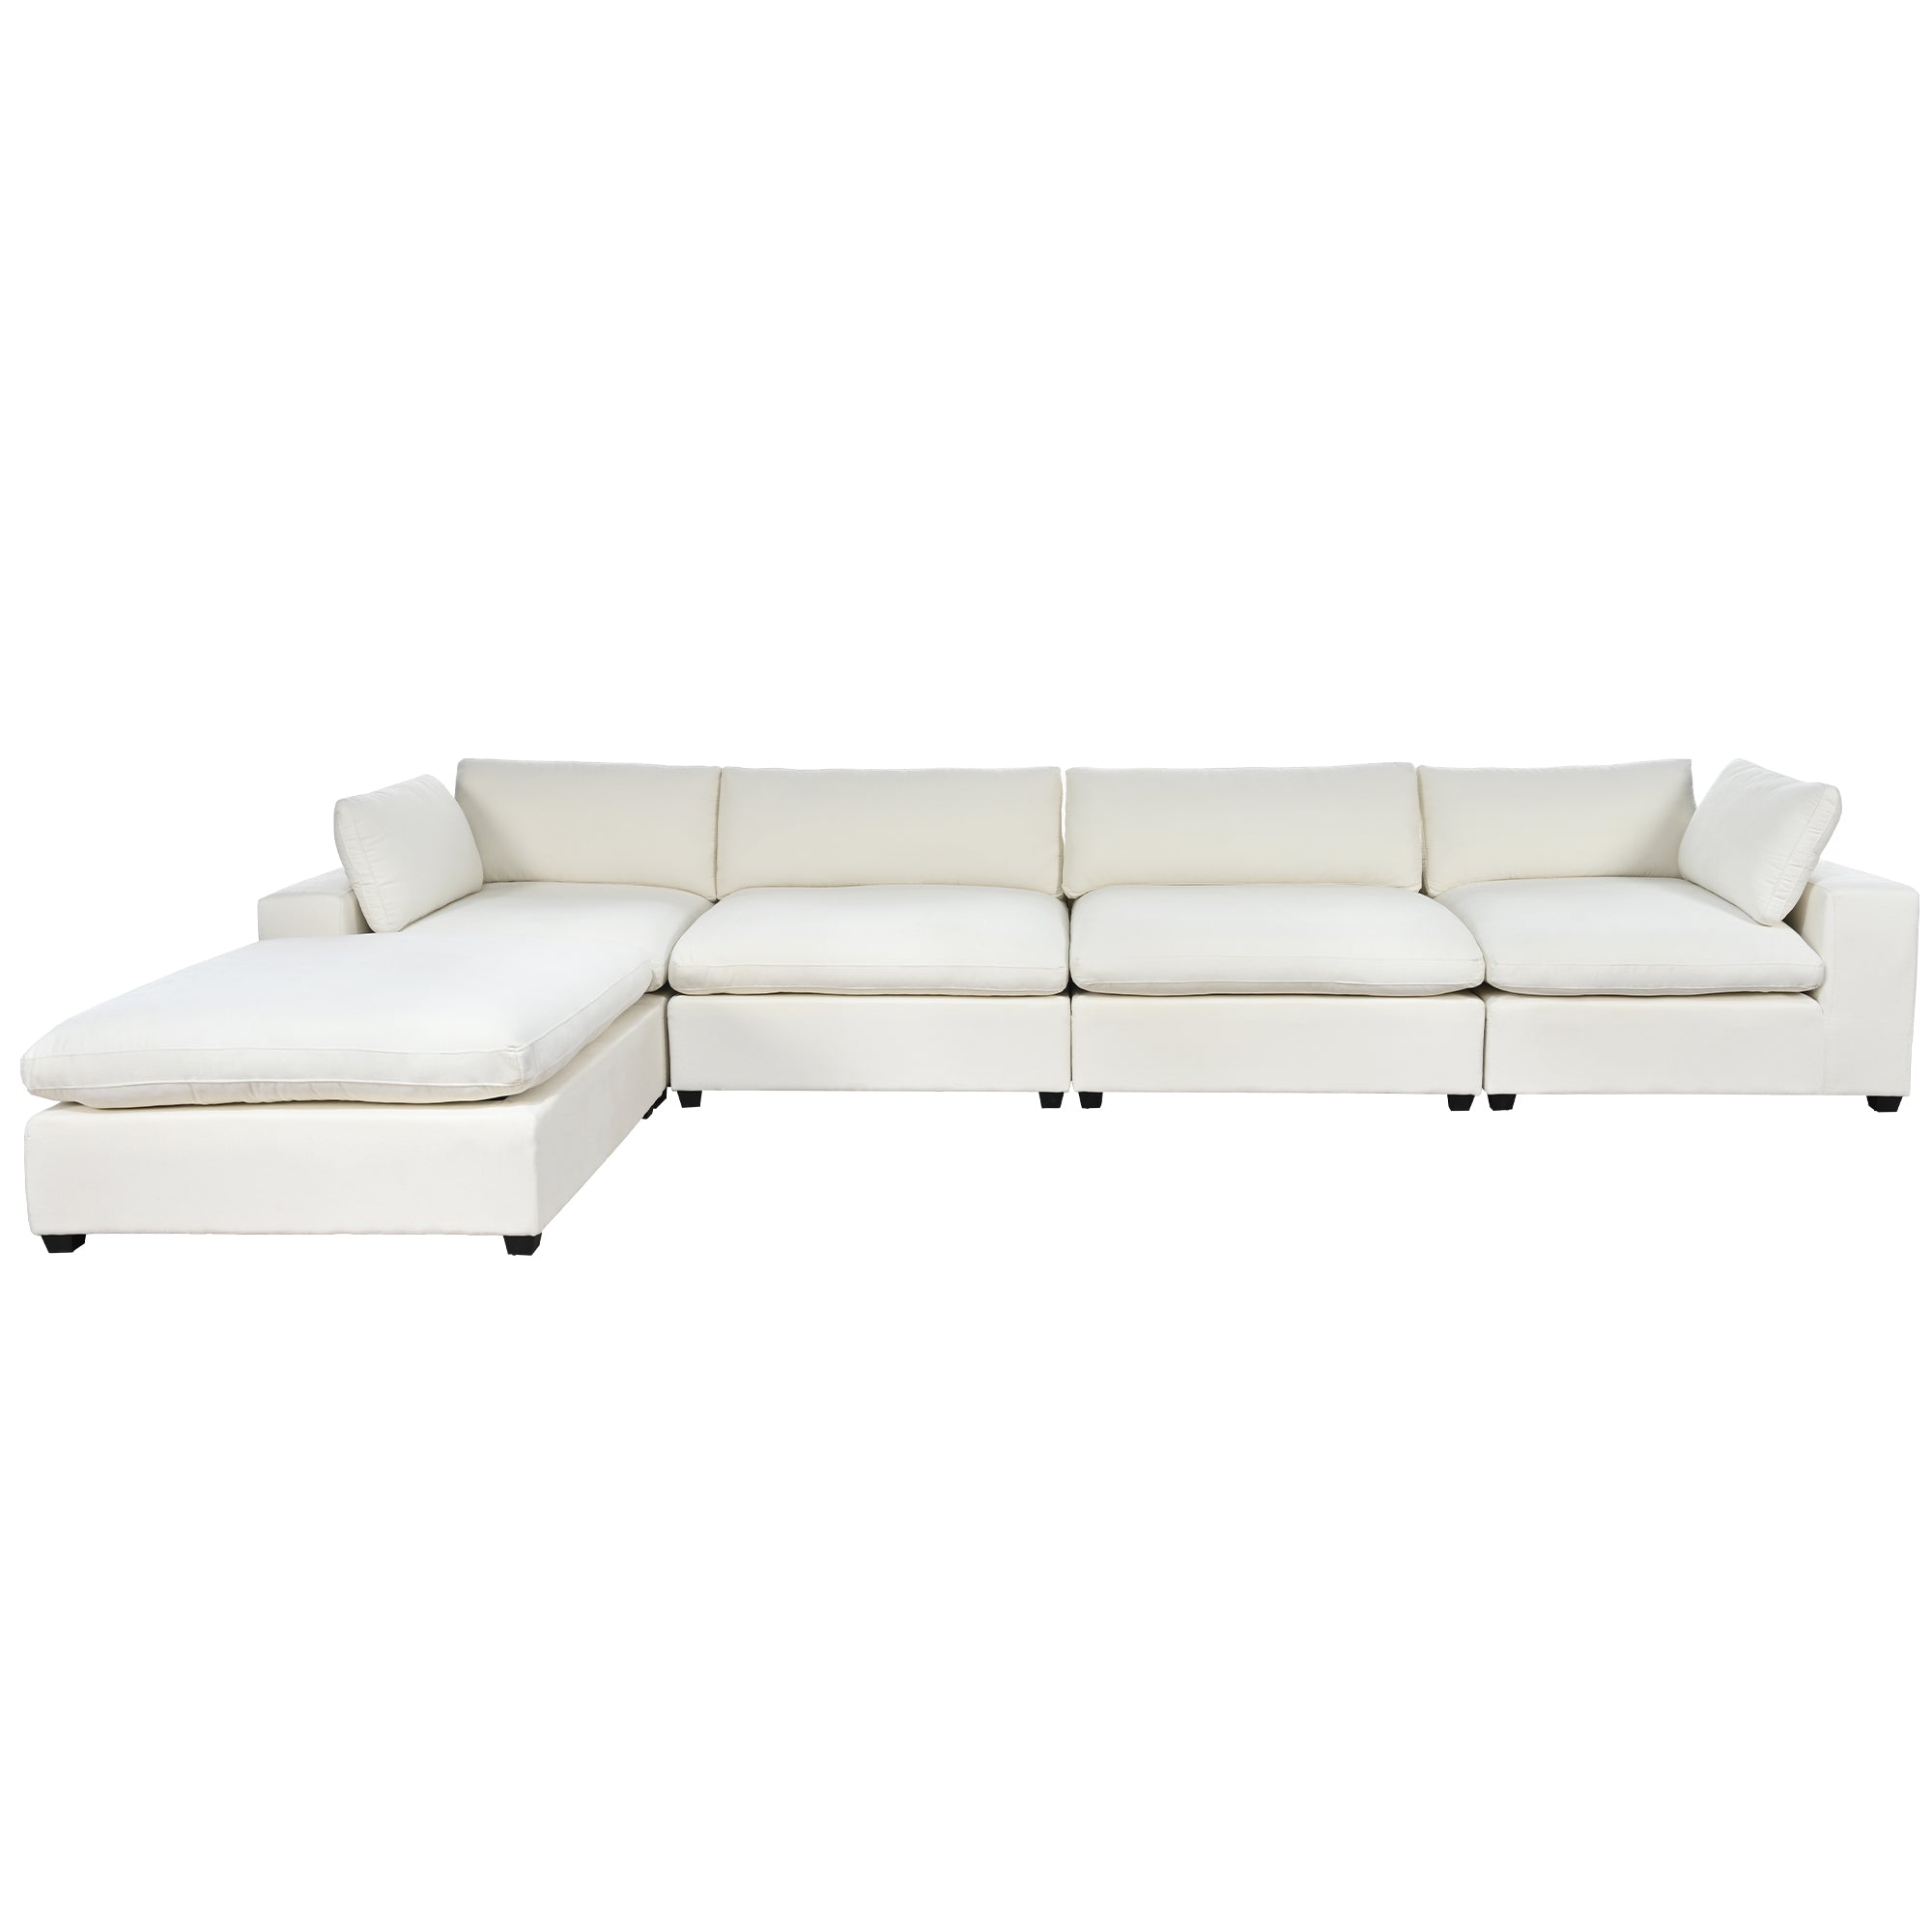 U style Upholstered Oversize Modular Sofa with beige-polyester-5 seat